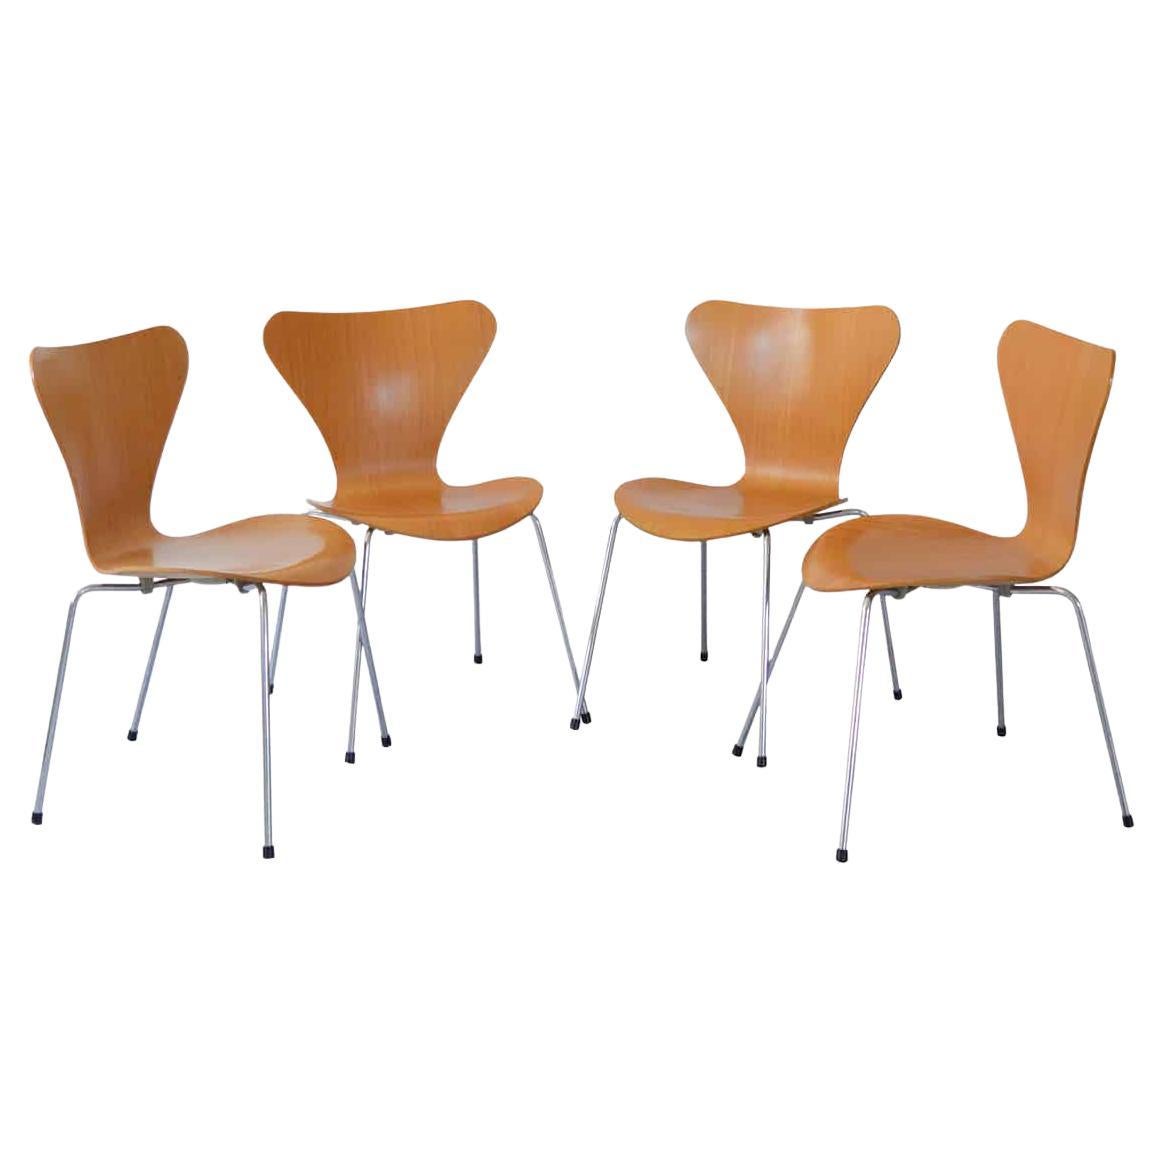 Set of Four Series 7 Chairs in Plywood by Arne Jacobsen, 1988